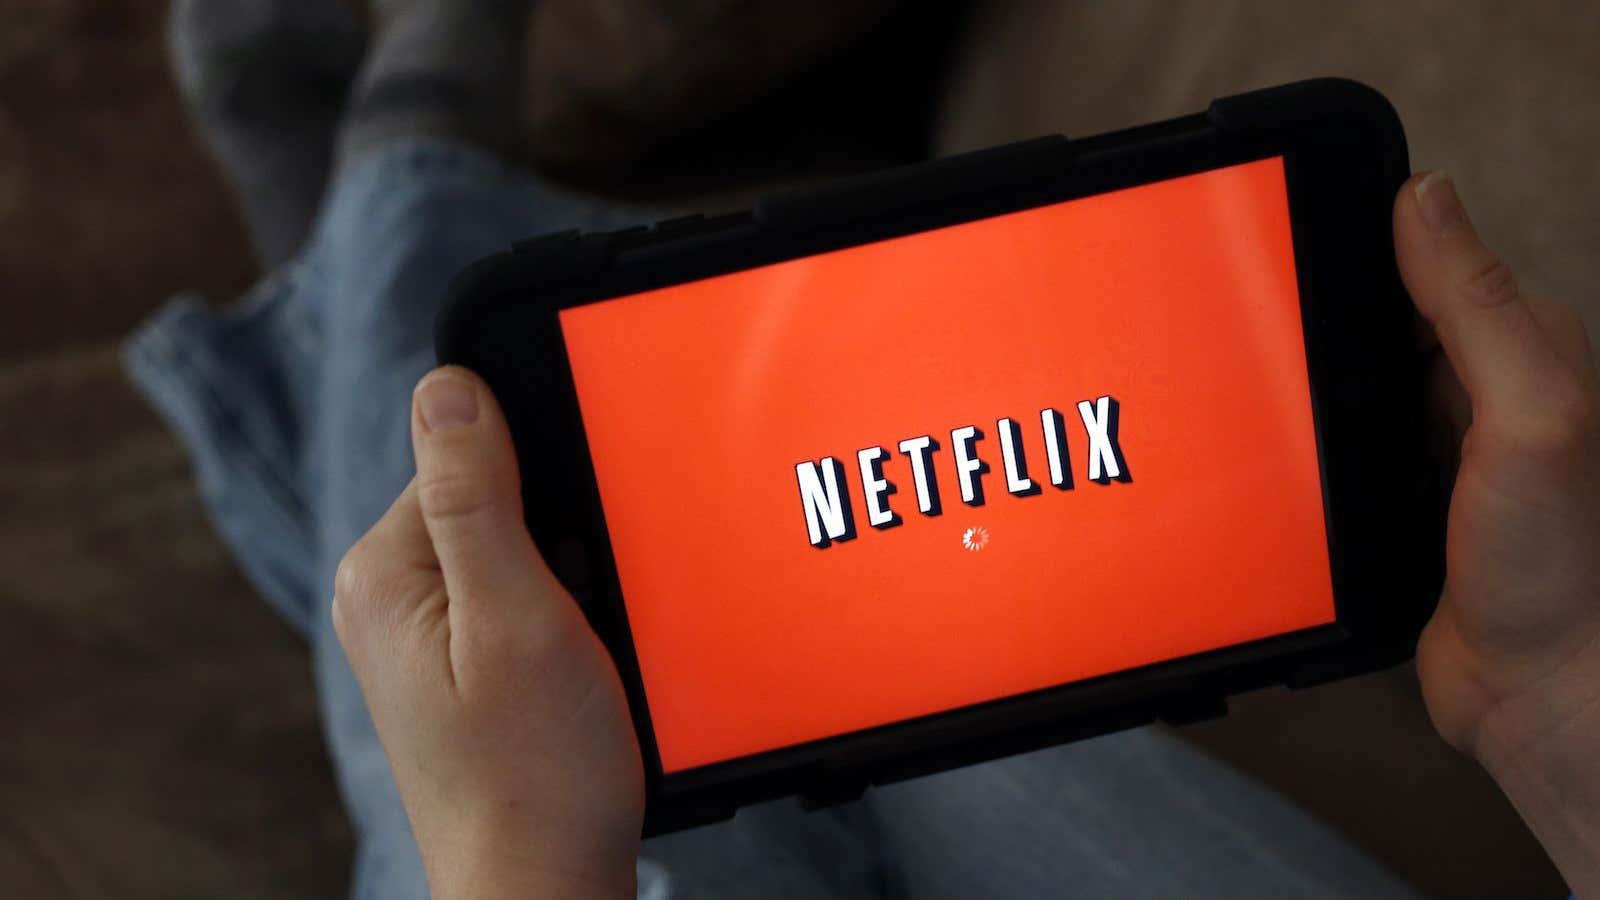 How much energy do you waste on binge-watching.